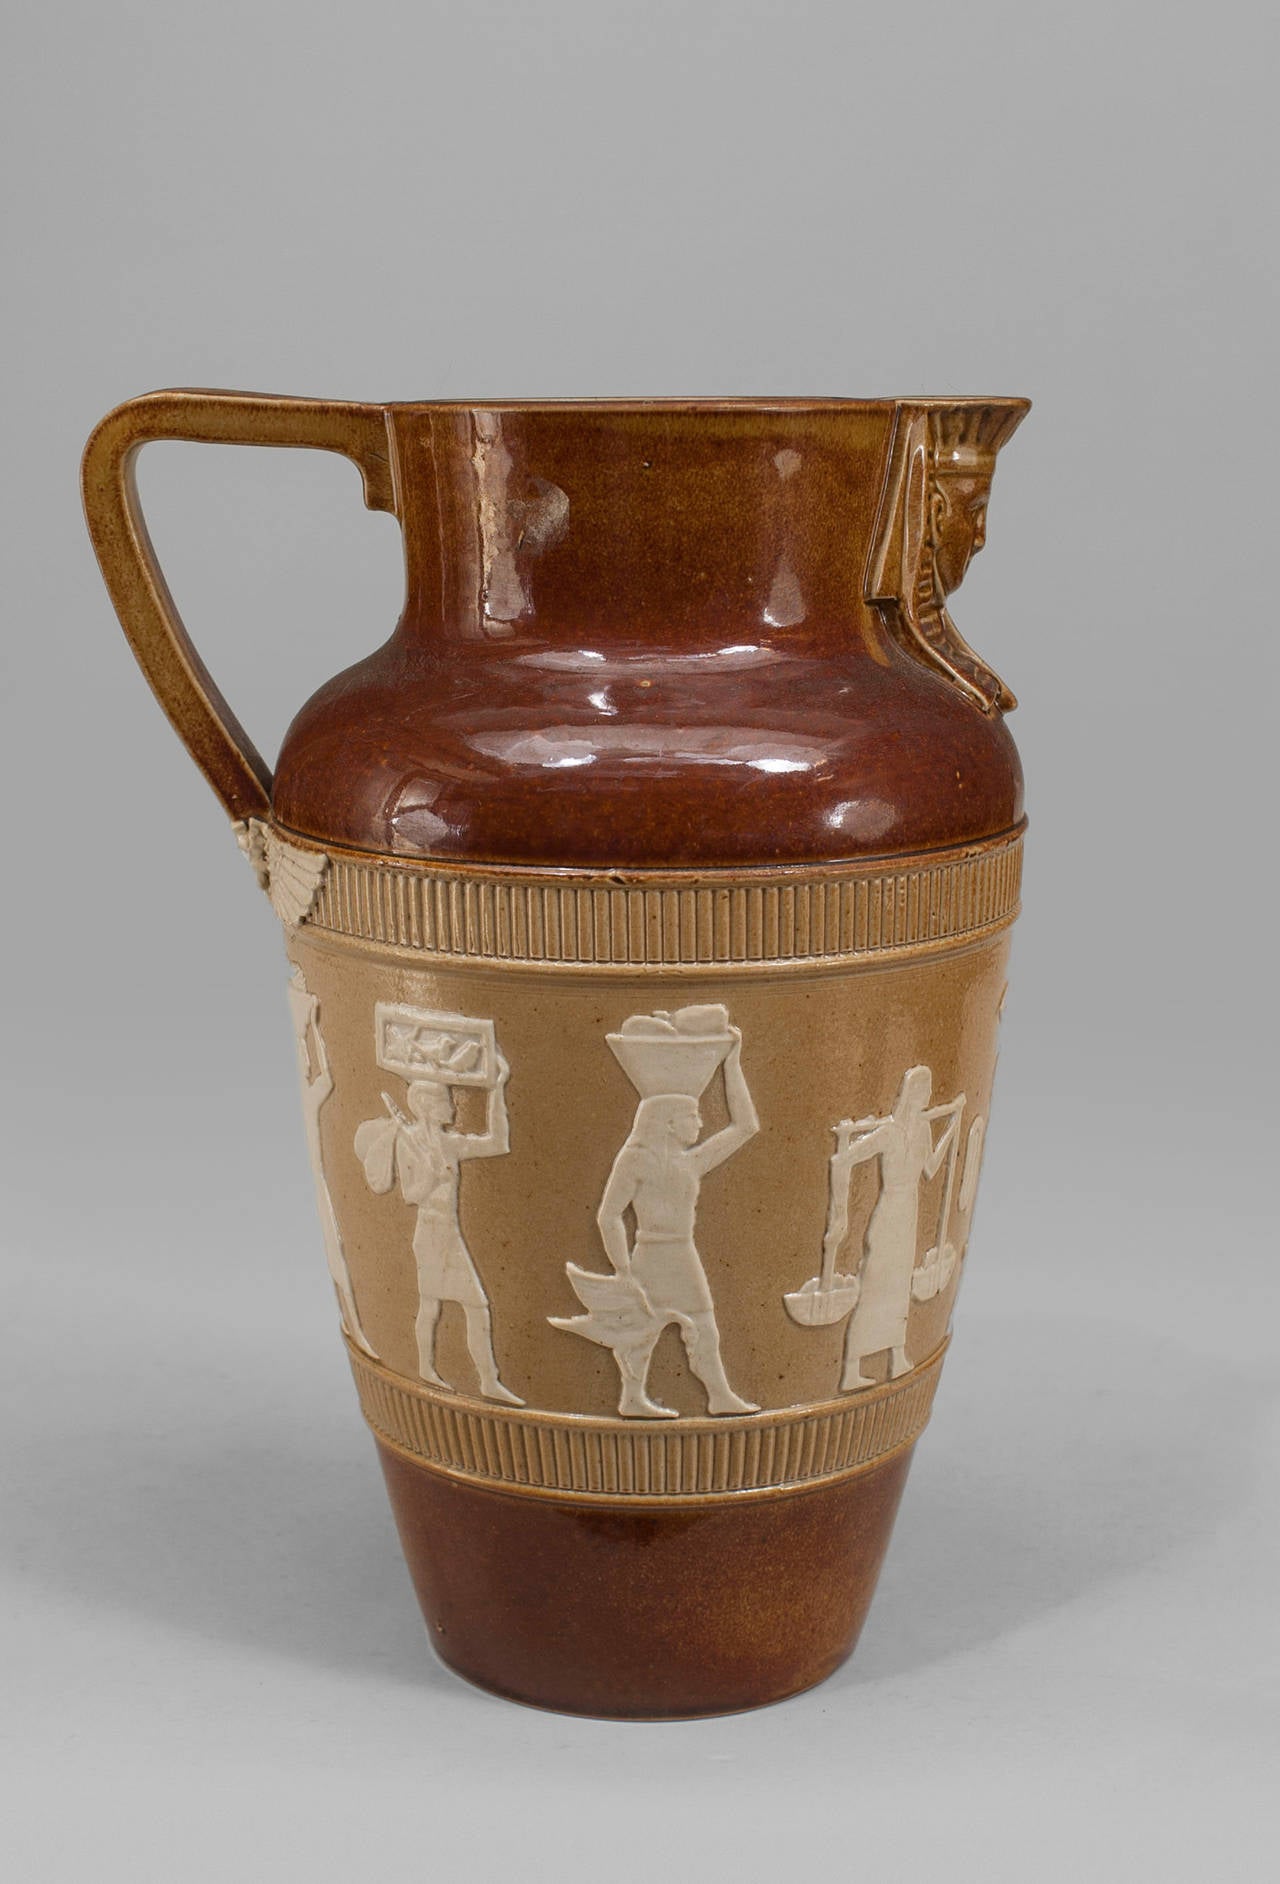 Middle Eastern Egyptian-style (English 1920s) small brown pitcher with sphinx head spout and beige and white classical figures in relief (impressed: DAULTON, LAMBBETH)
